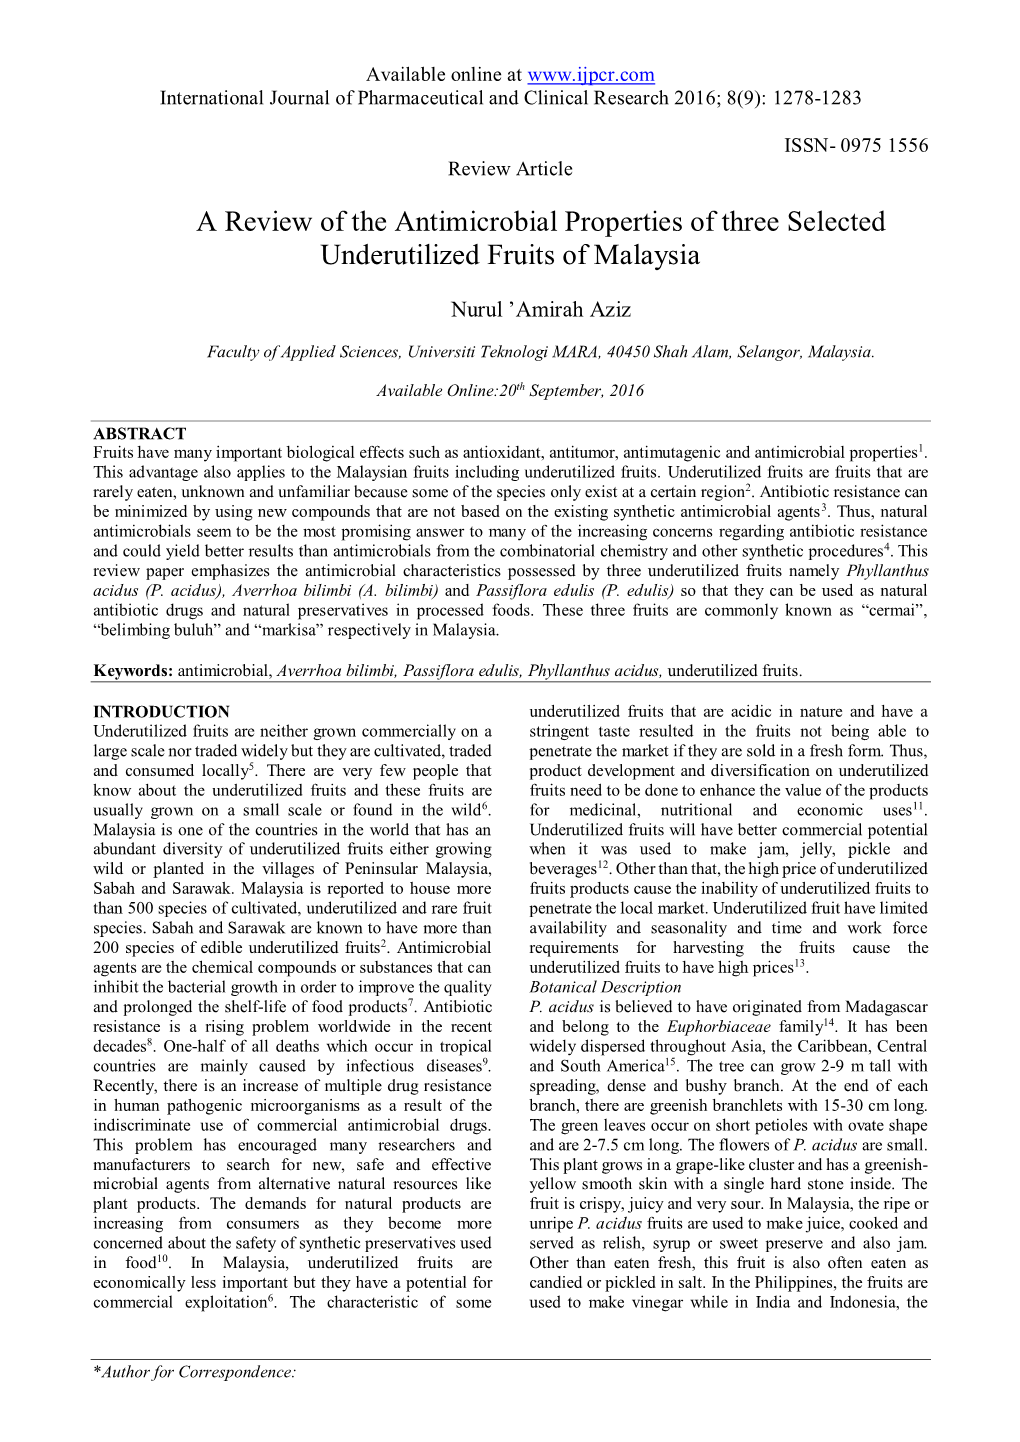 A Review of the Antimicrobial Properties of Three Selected Underutilized Fruits of Malaysia